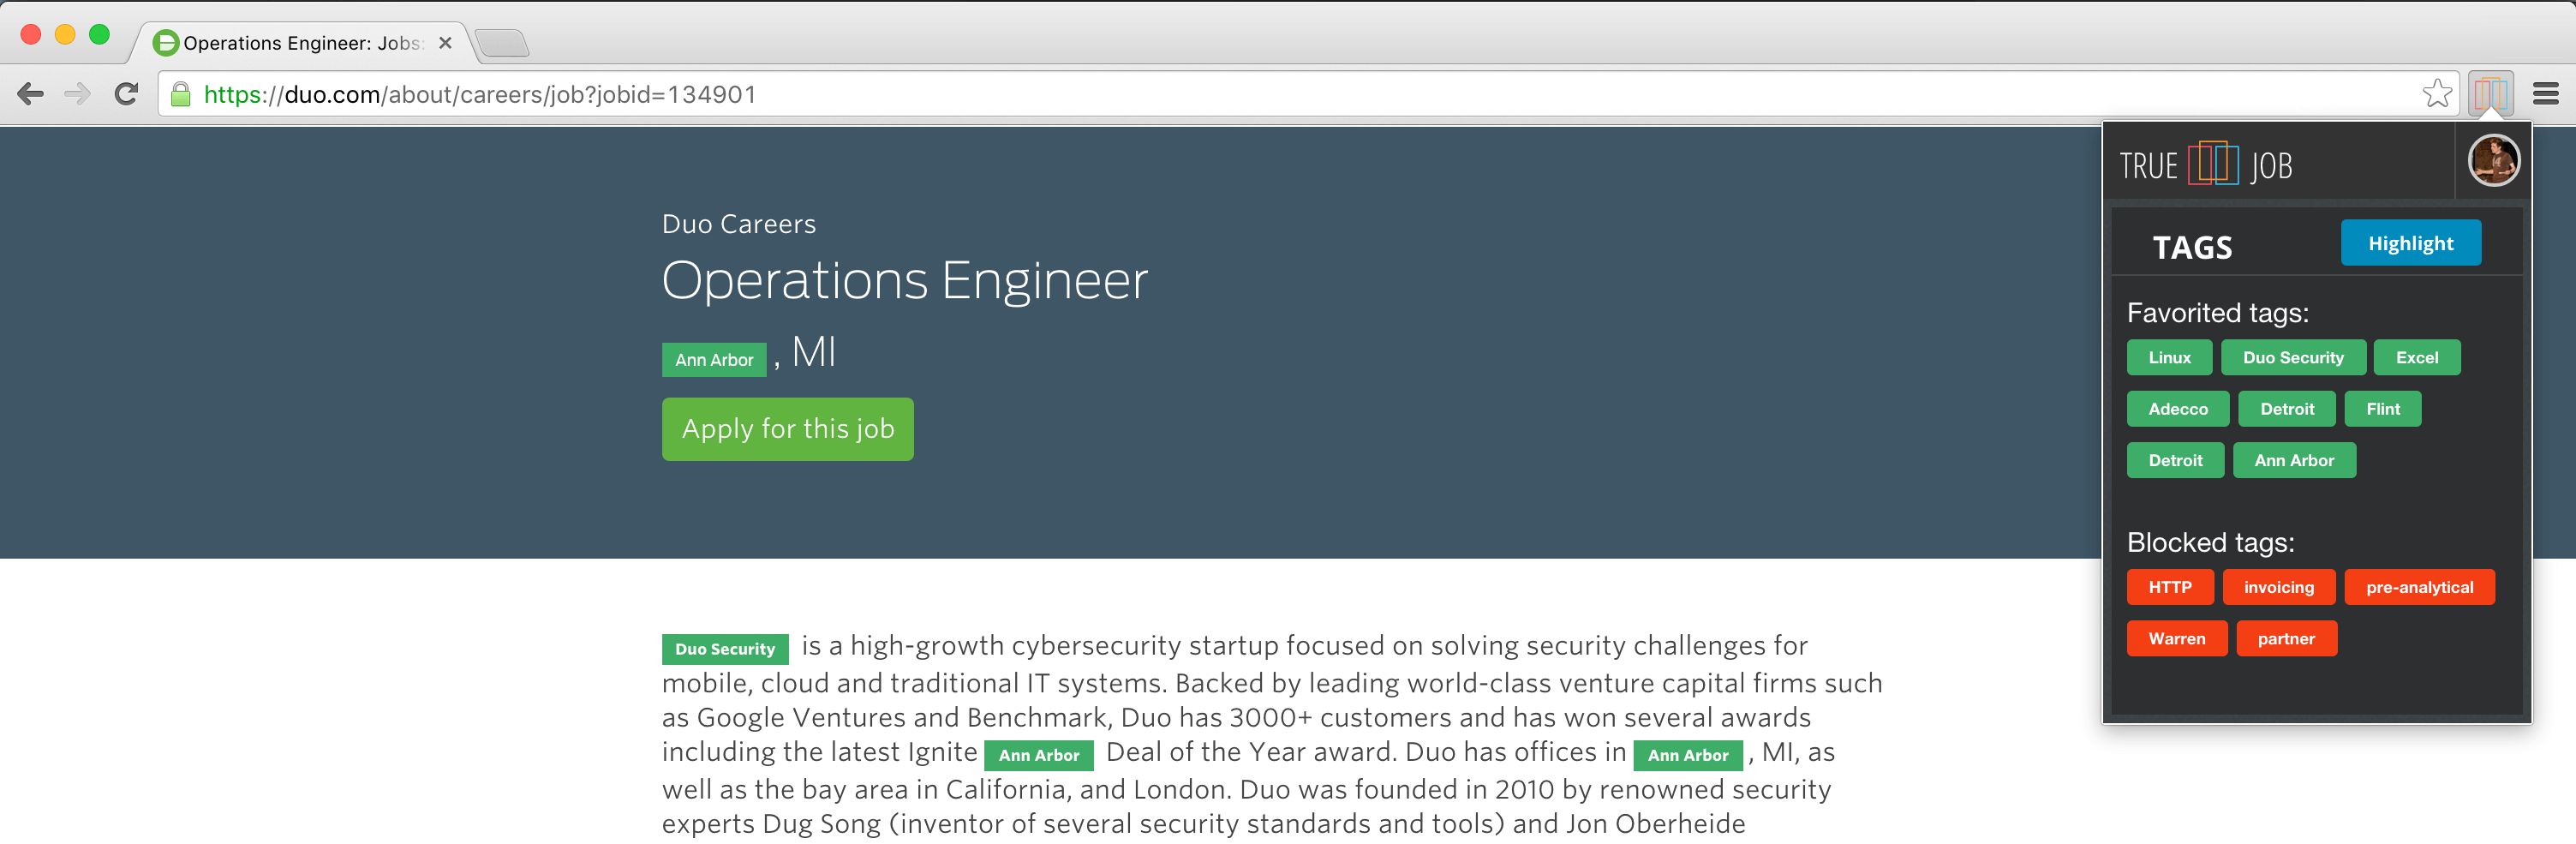 Screenshot of TrueJob chrome extension being used on a job posting page